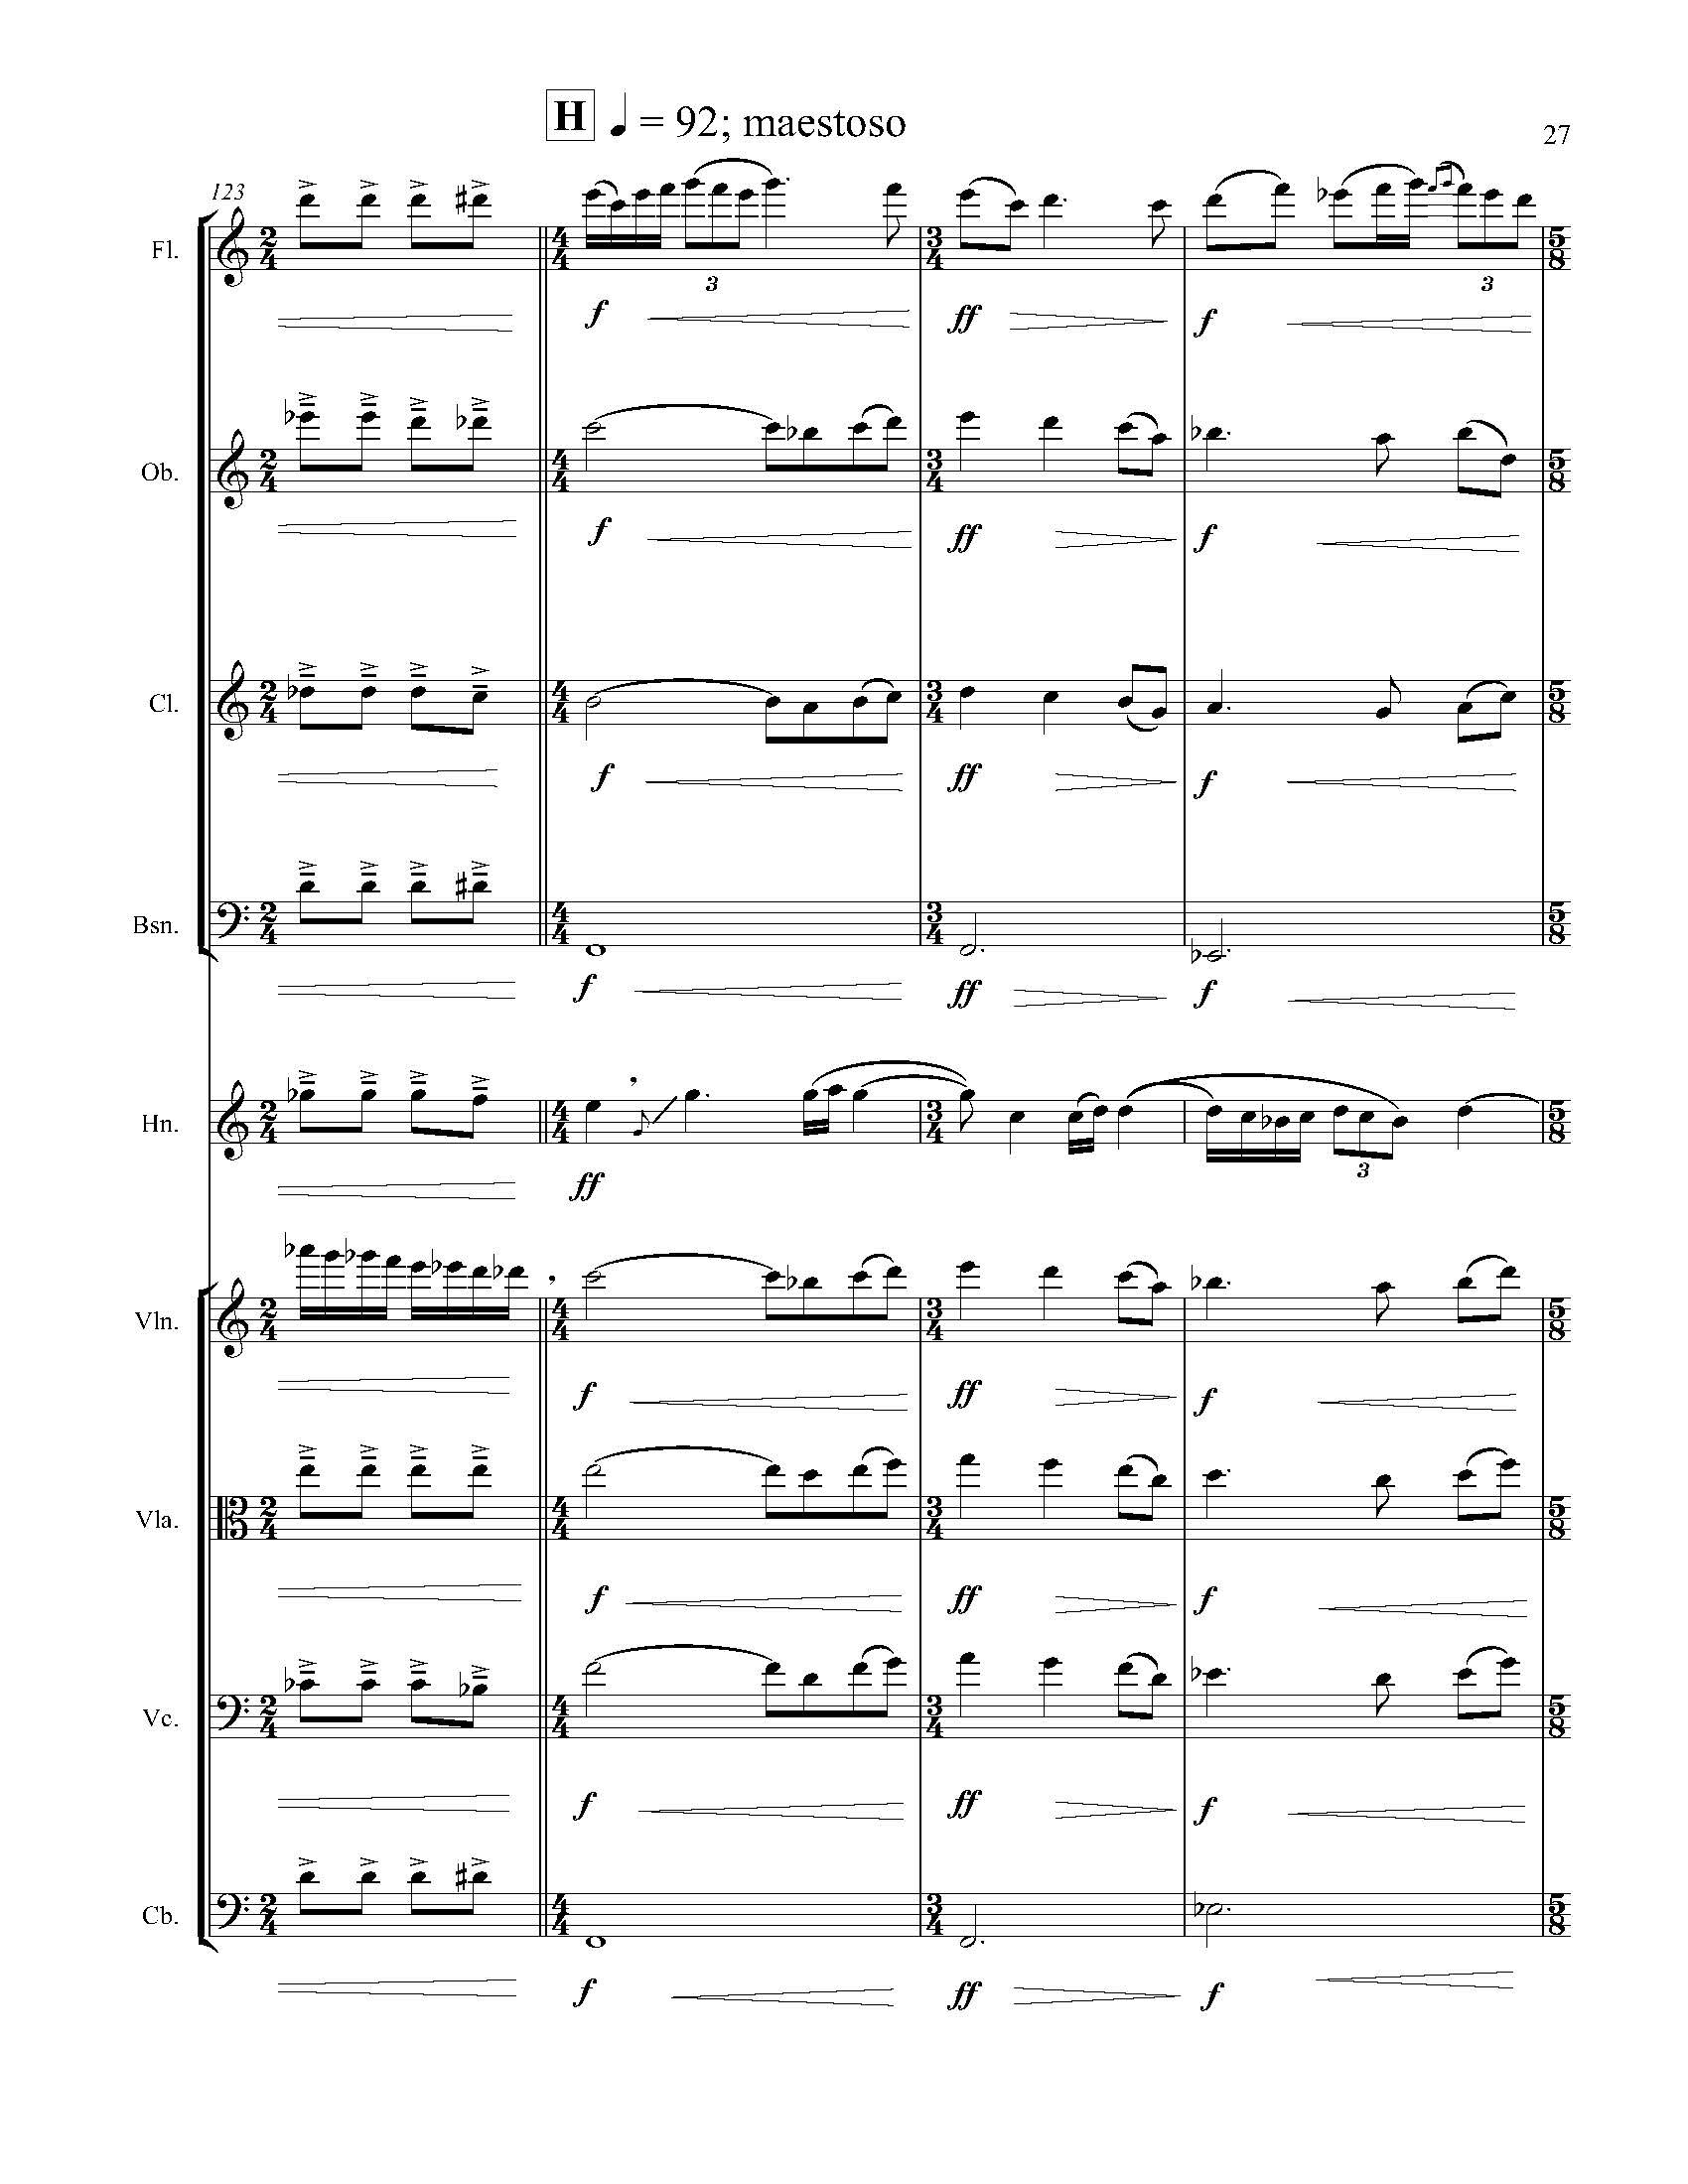 In Search of a Bird - Complete Score_Page_33.jpg